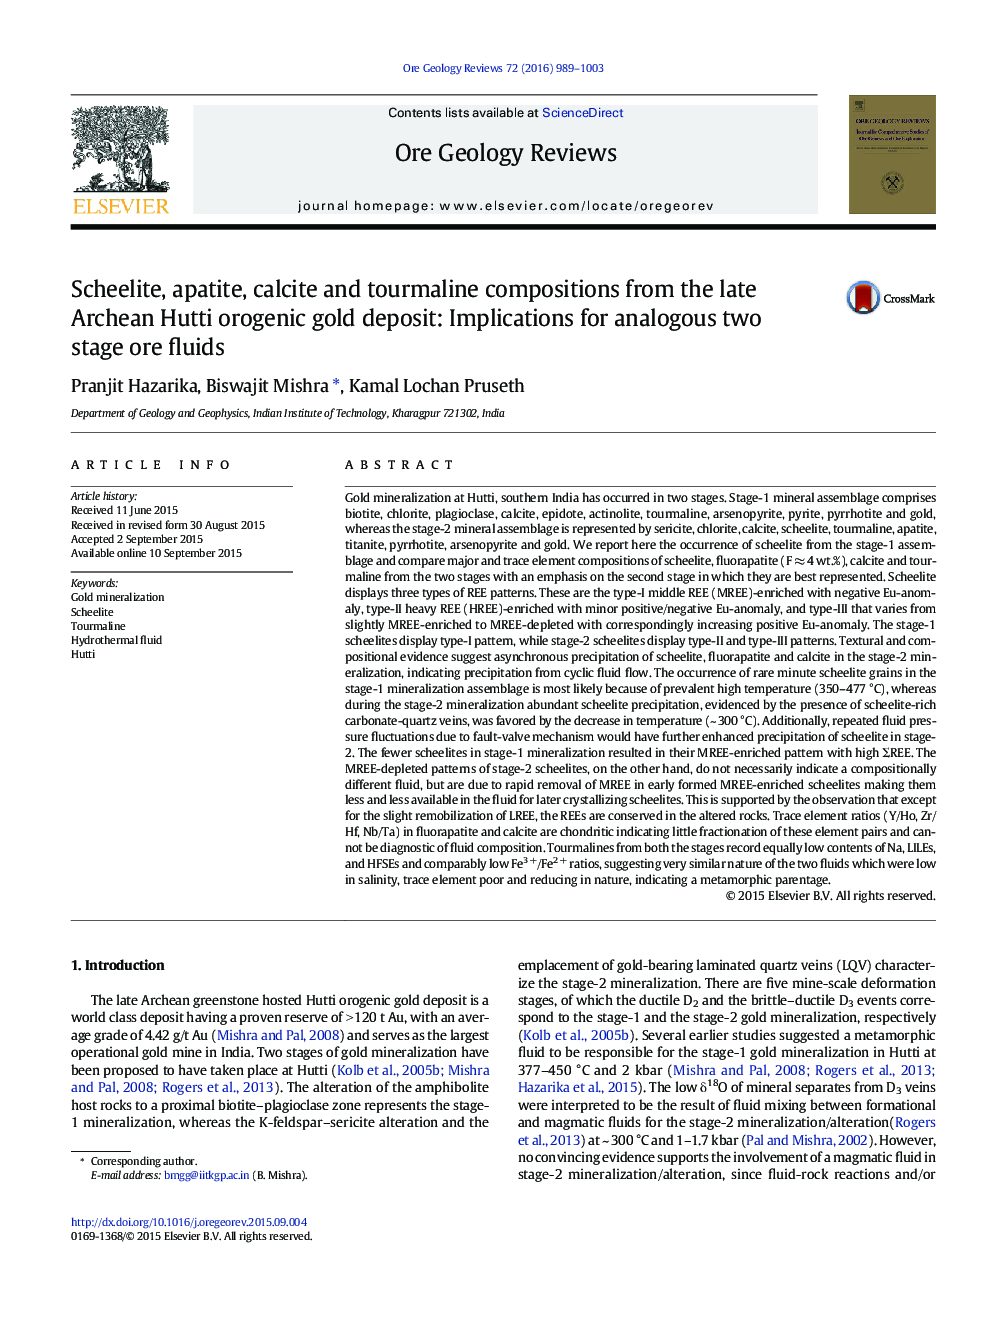 Scheelite, apatite, calcite and tourmaline compositions from the late Archean Hutti orogenic gold deposit: Implications for analogous two stage ore fluids